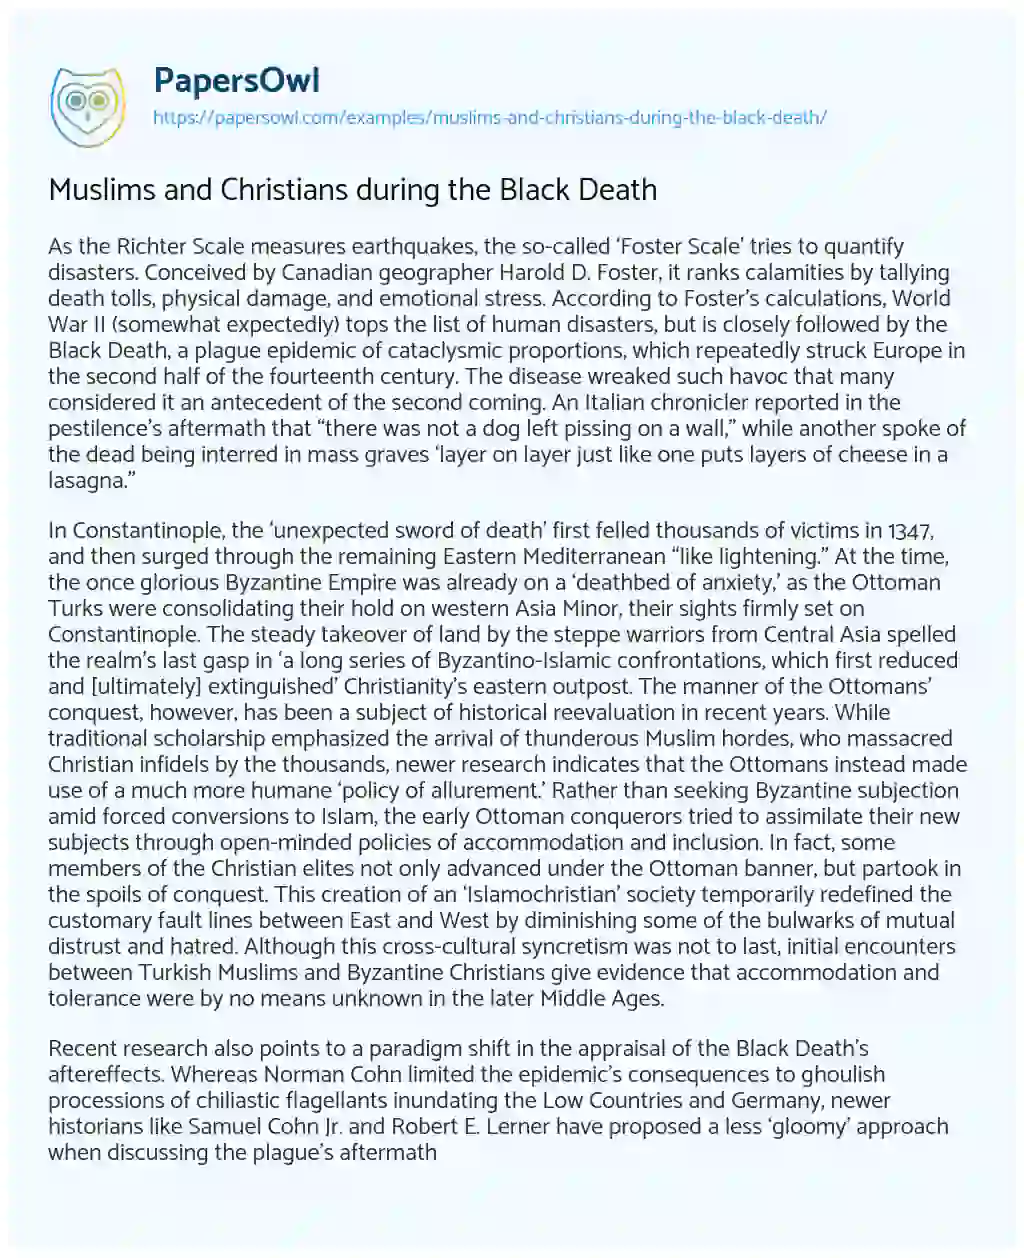 Essay on Muslims and Christians during the Black Death